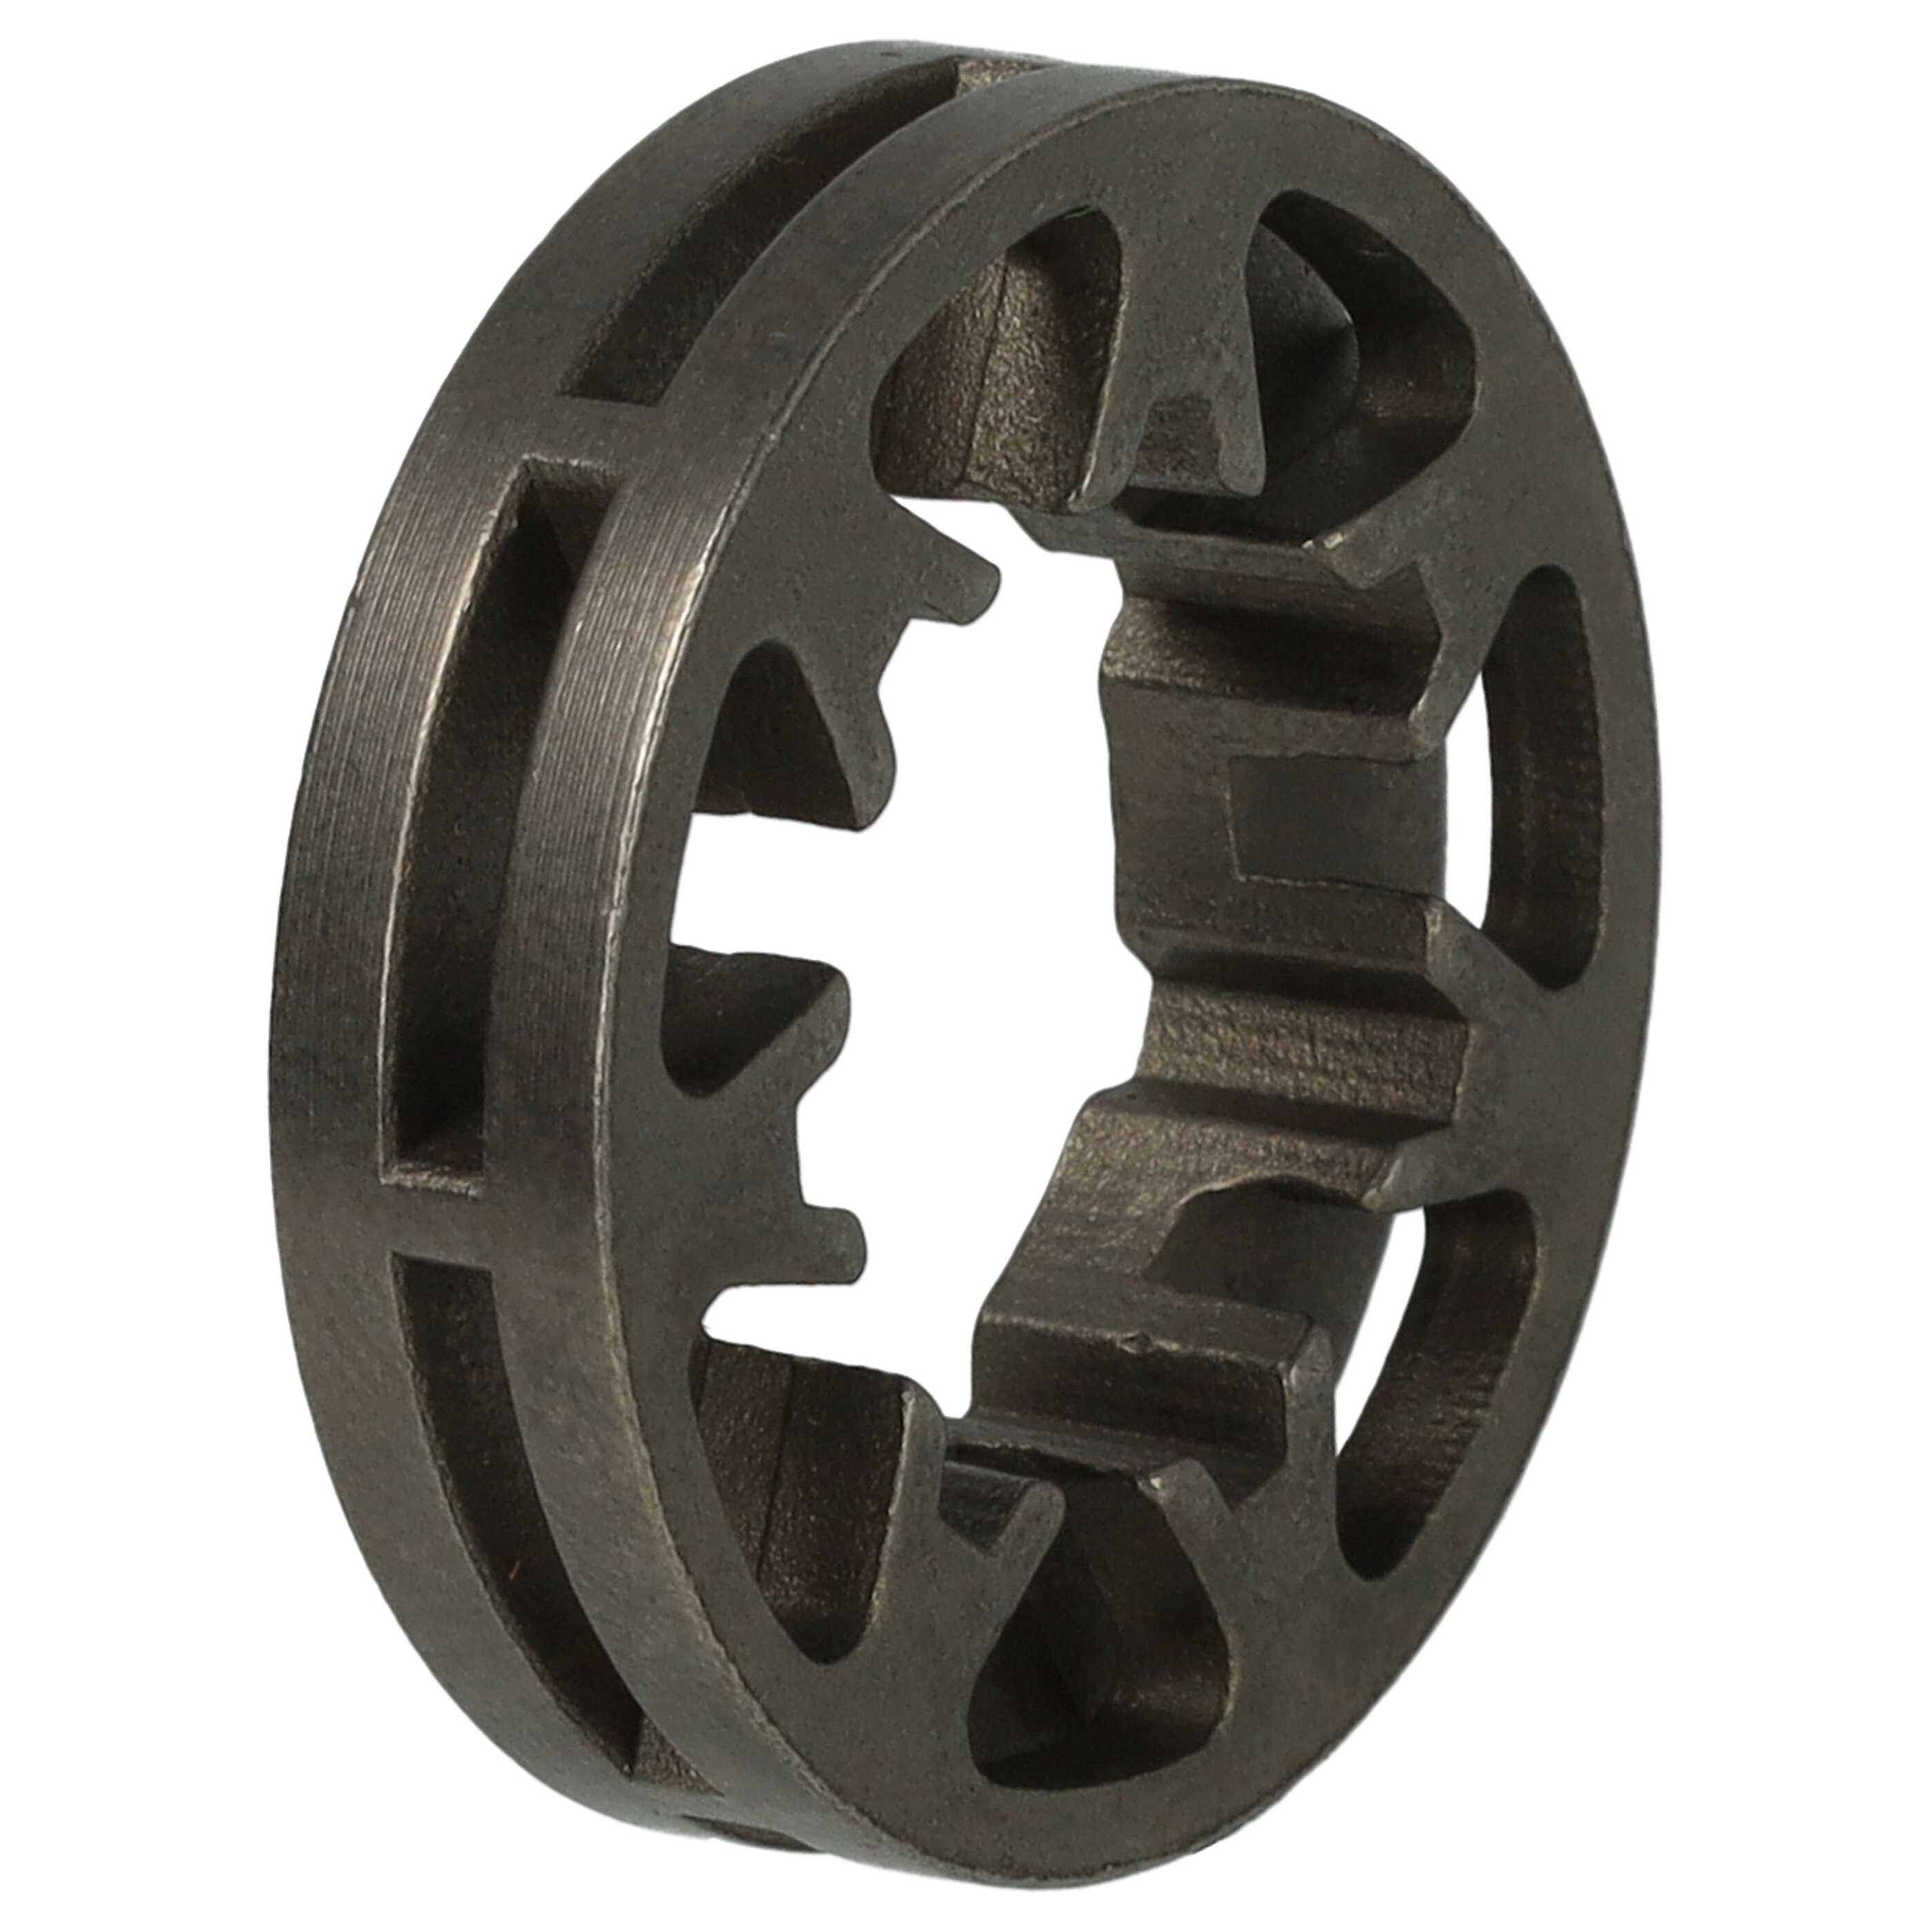 Reduction Ring suitable for Stihl MS210 Chainsaw etc. - Rim Sprocket, Chain Wheel 